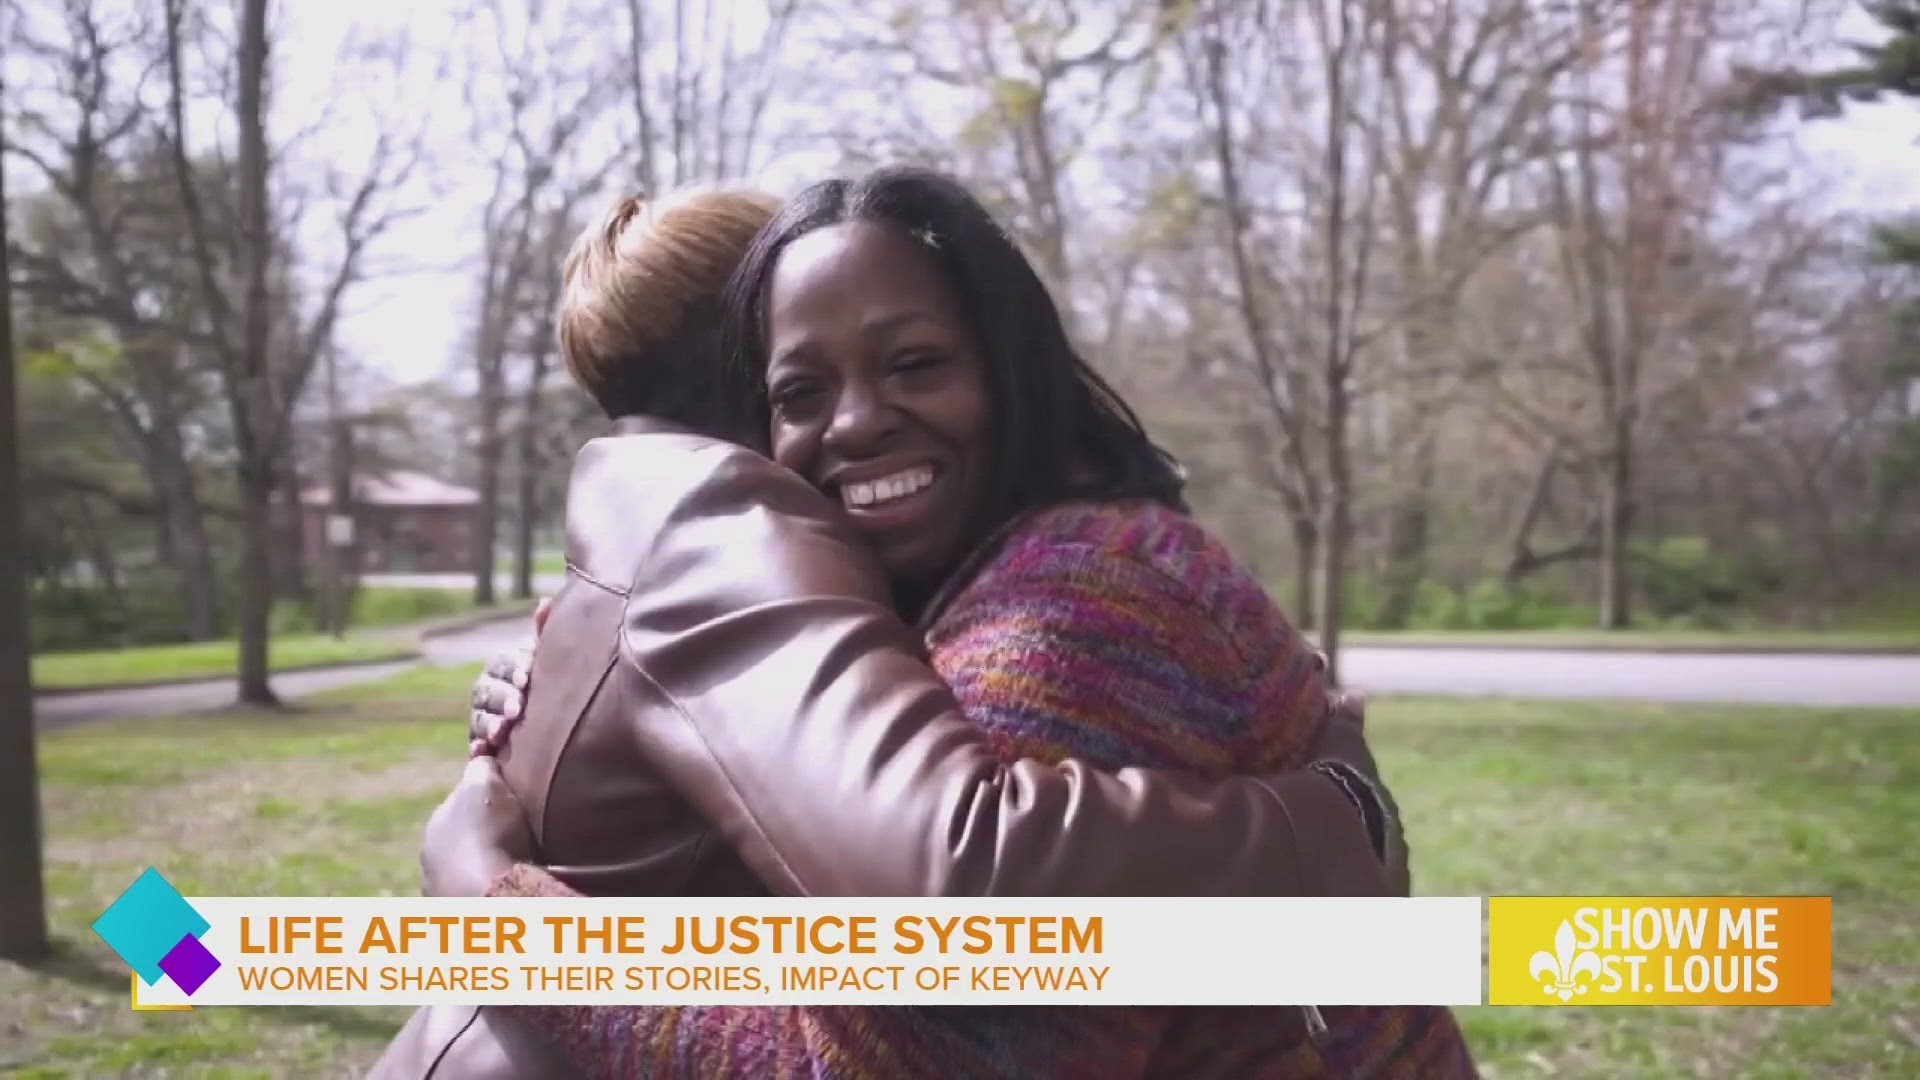 Hear the positive, hopeful impact one local non-profit has on justice-involved women